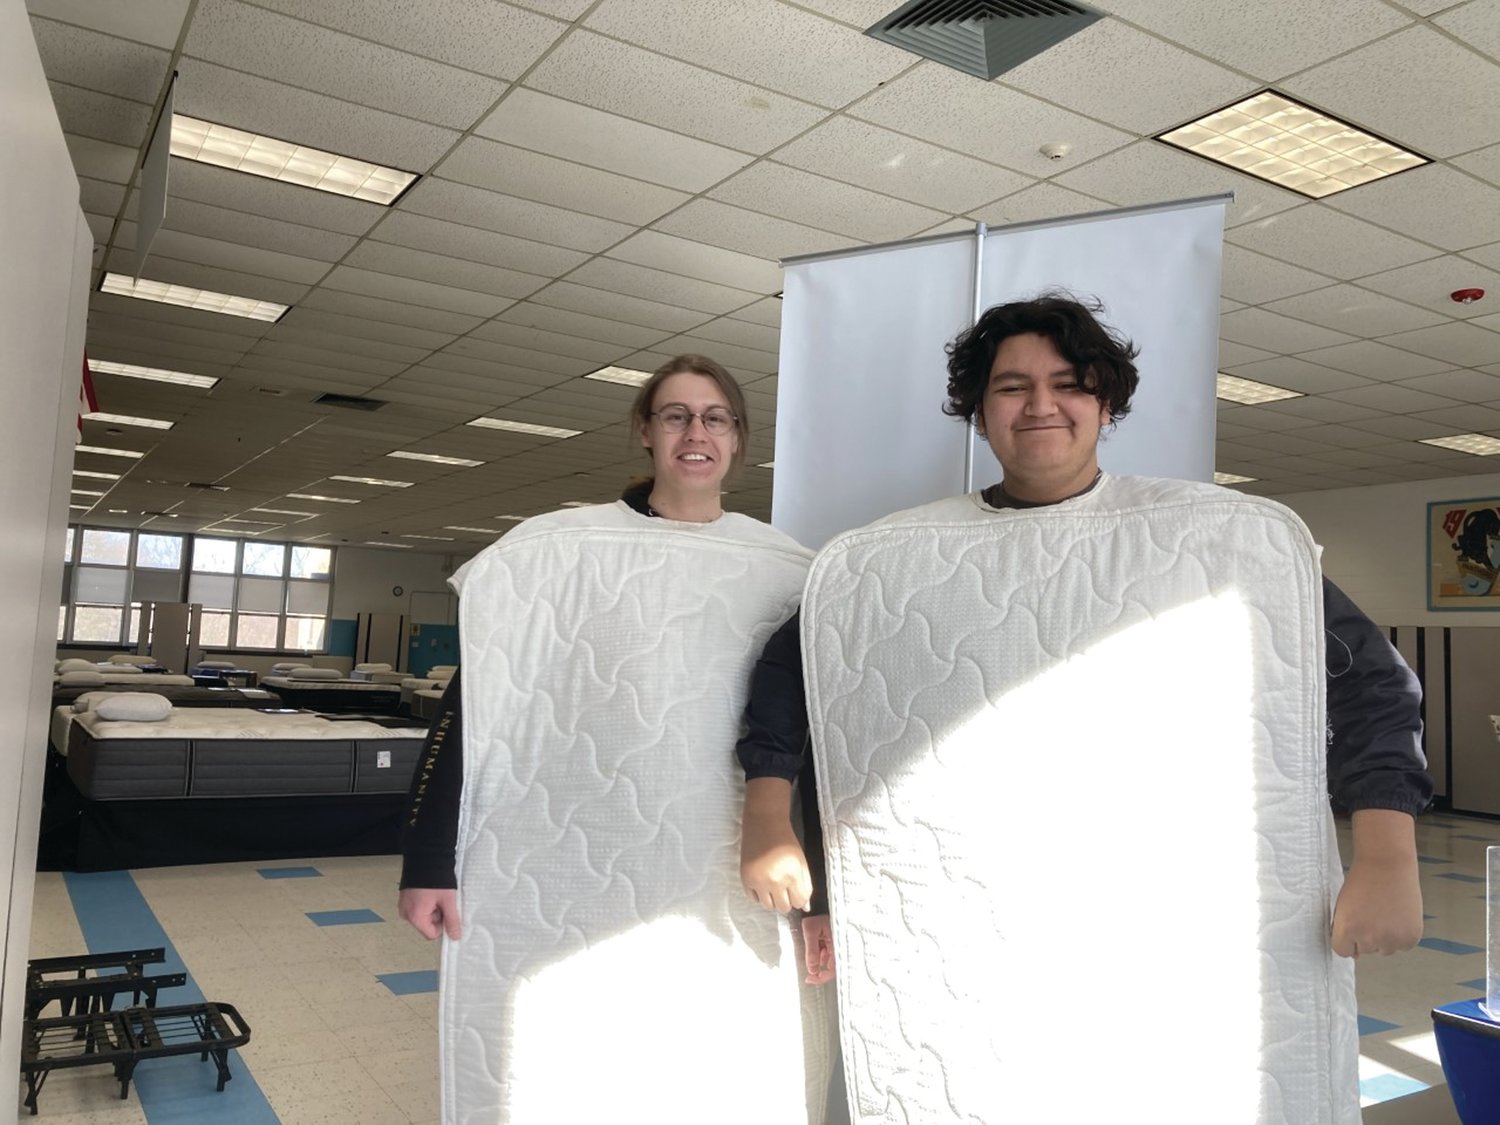 MIGHTY MUSICIANS: JHS percussionist Johnathan Guilmette and Trumpet player Gerson Cabrera show off their mattress outfits to promote Saturday’s sale that helped fund the music department’s trip to Williamsburg, Virginia. The students left at 5 a.m. Thursday morning.